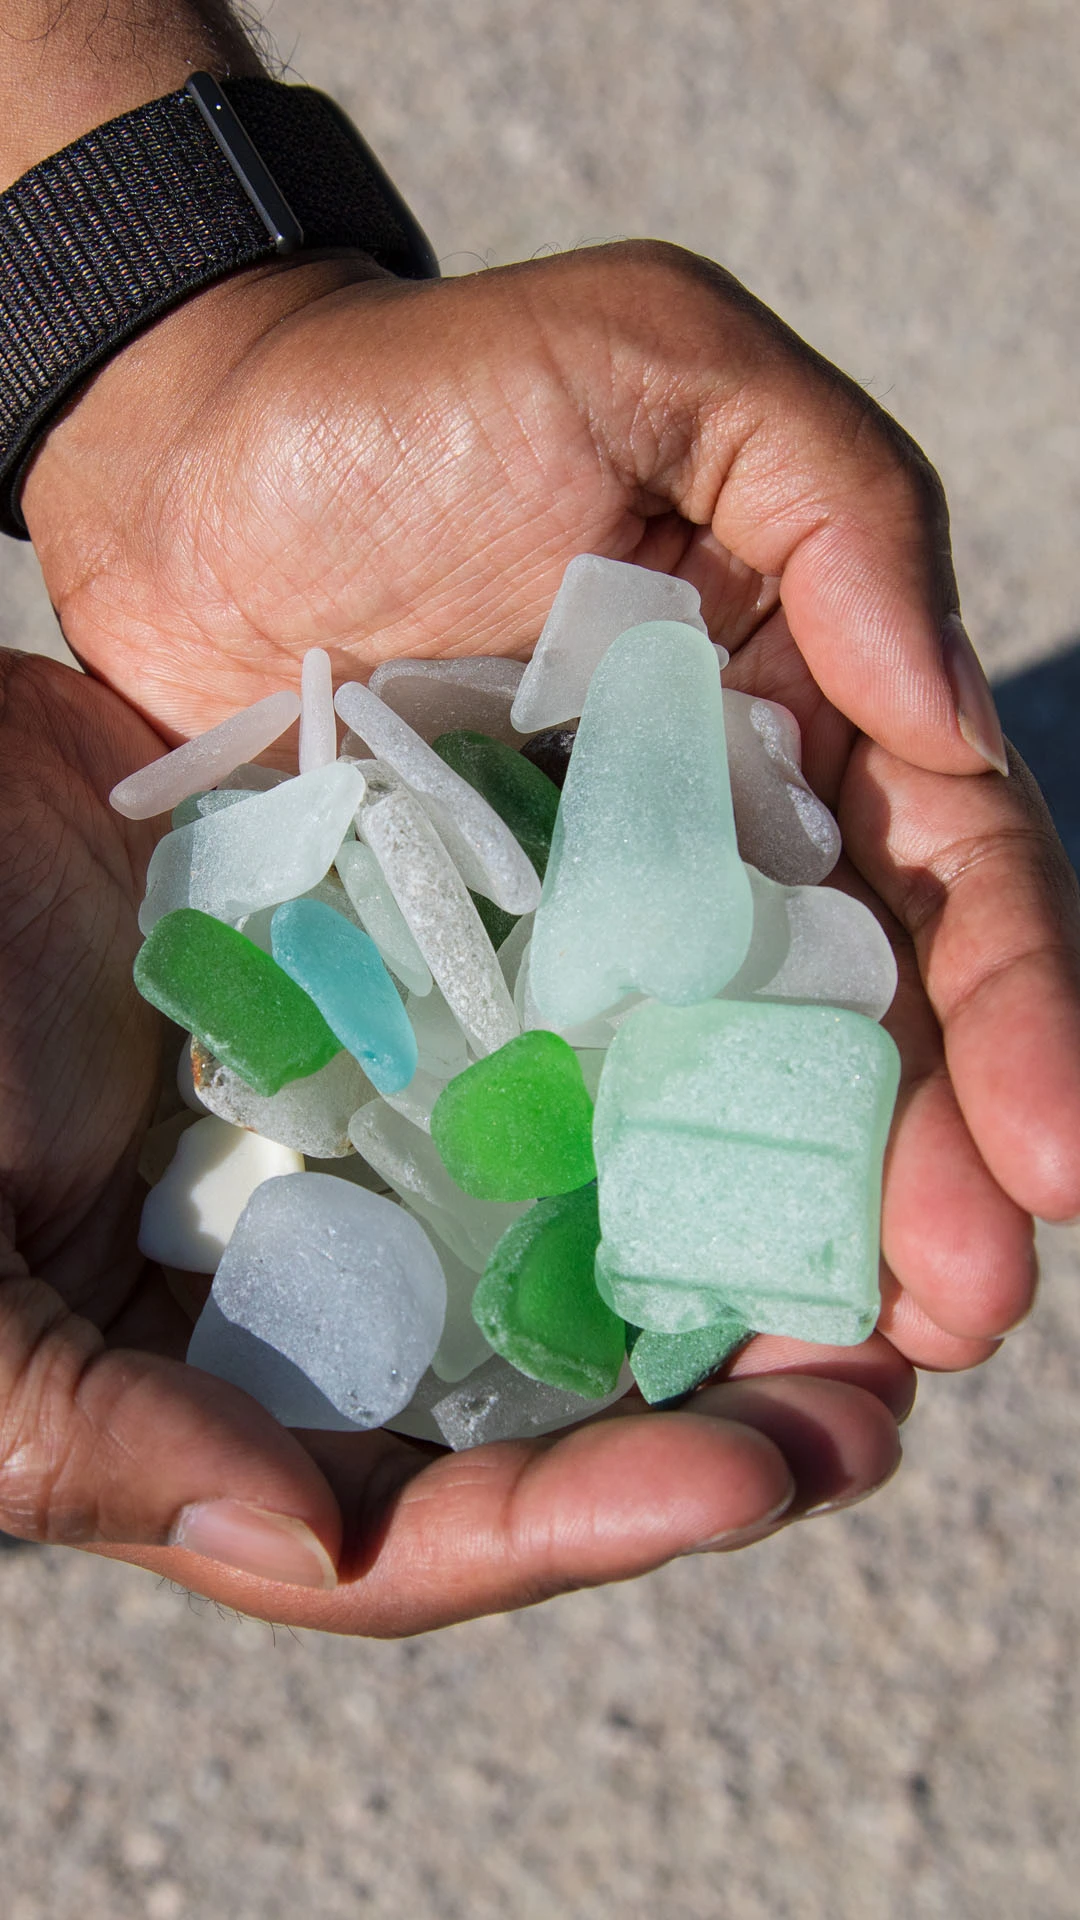 Collecting Beach Glass in Southwest Michigan